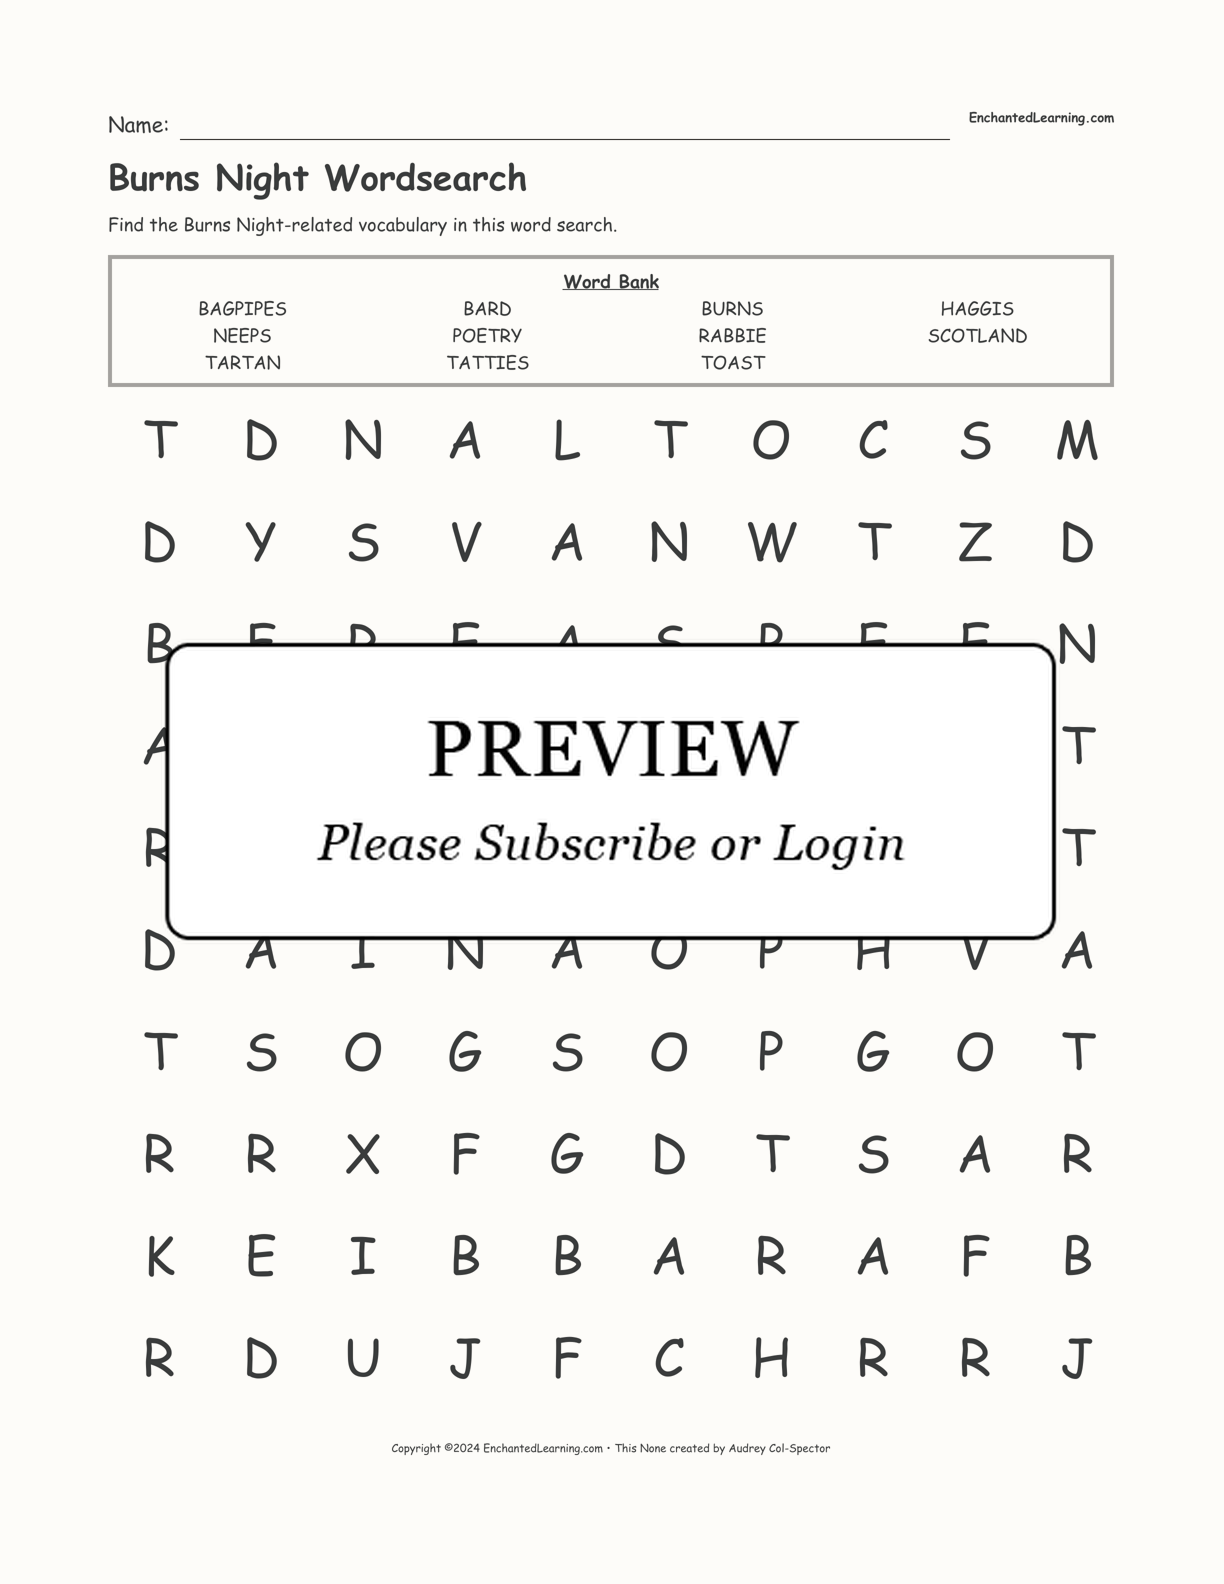 Burns Night Wordsearch interactive worksheet page 1